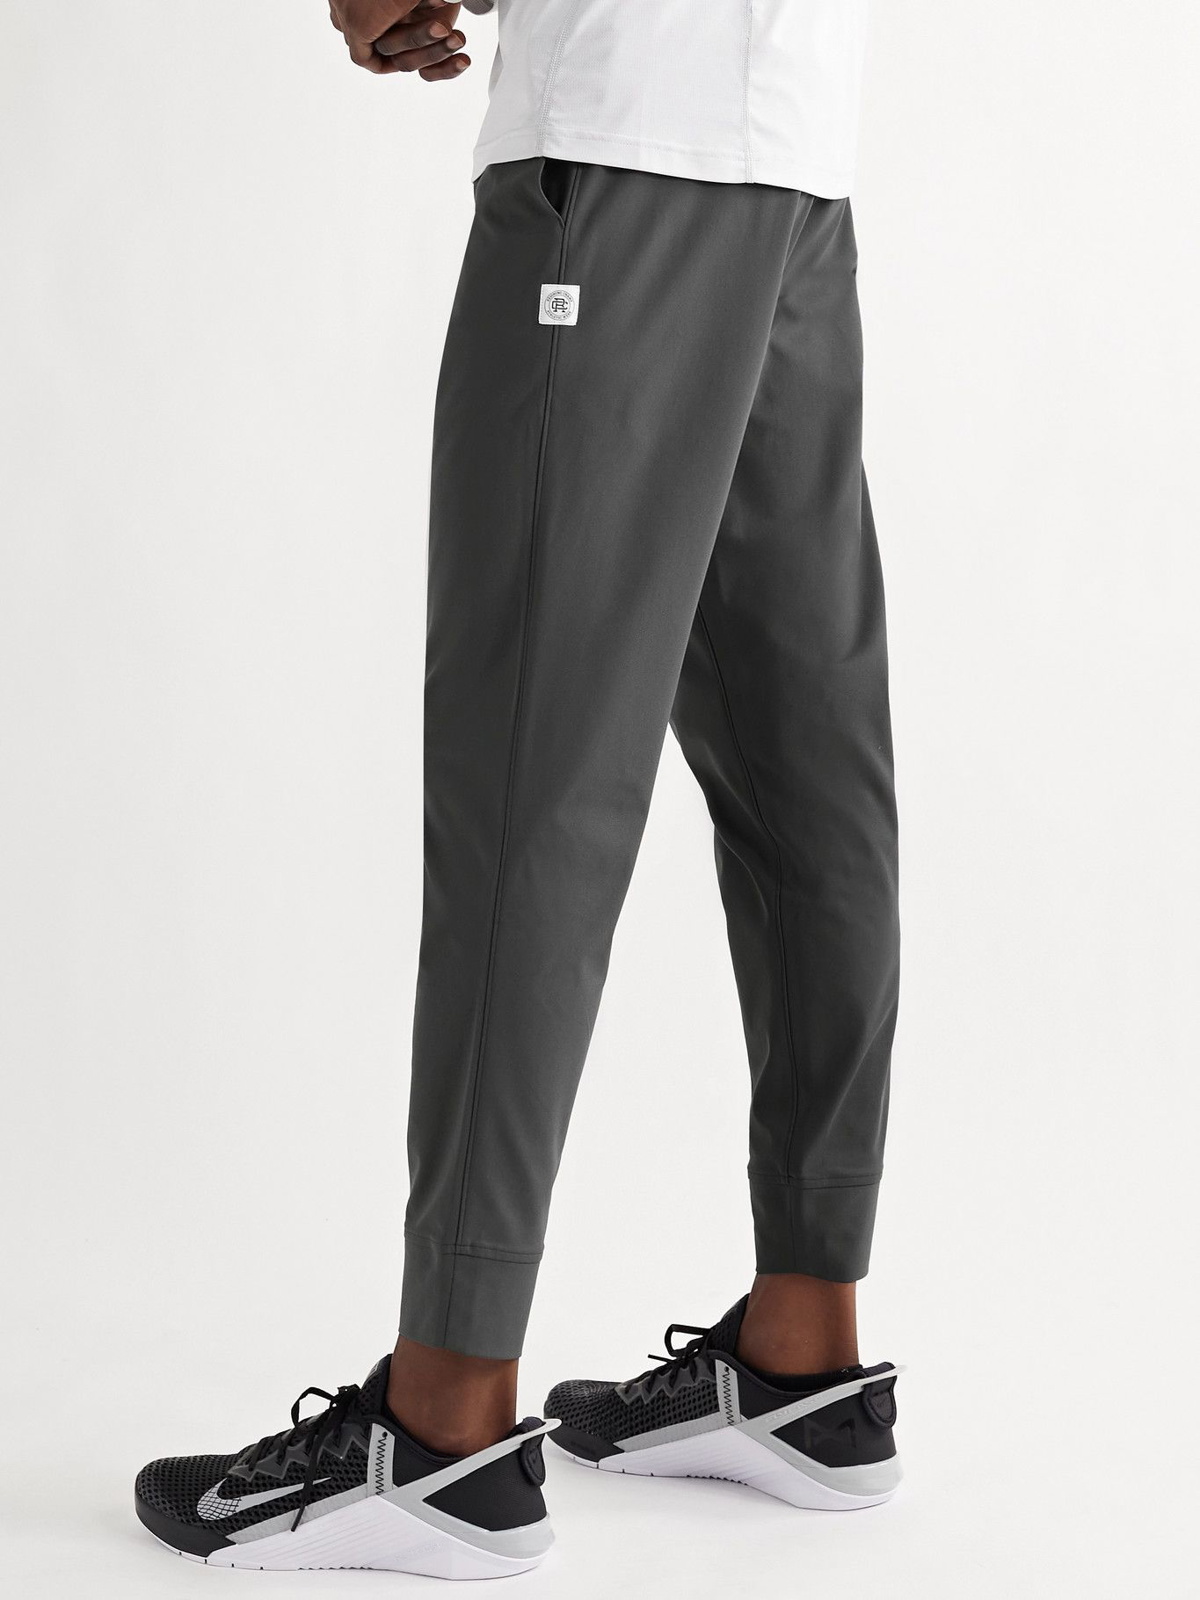 Coach's Jogger  Reigning Champ